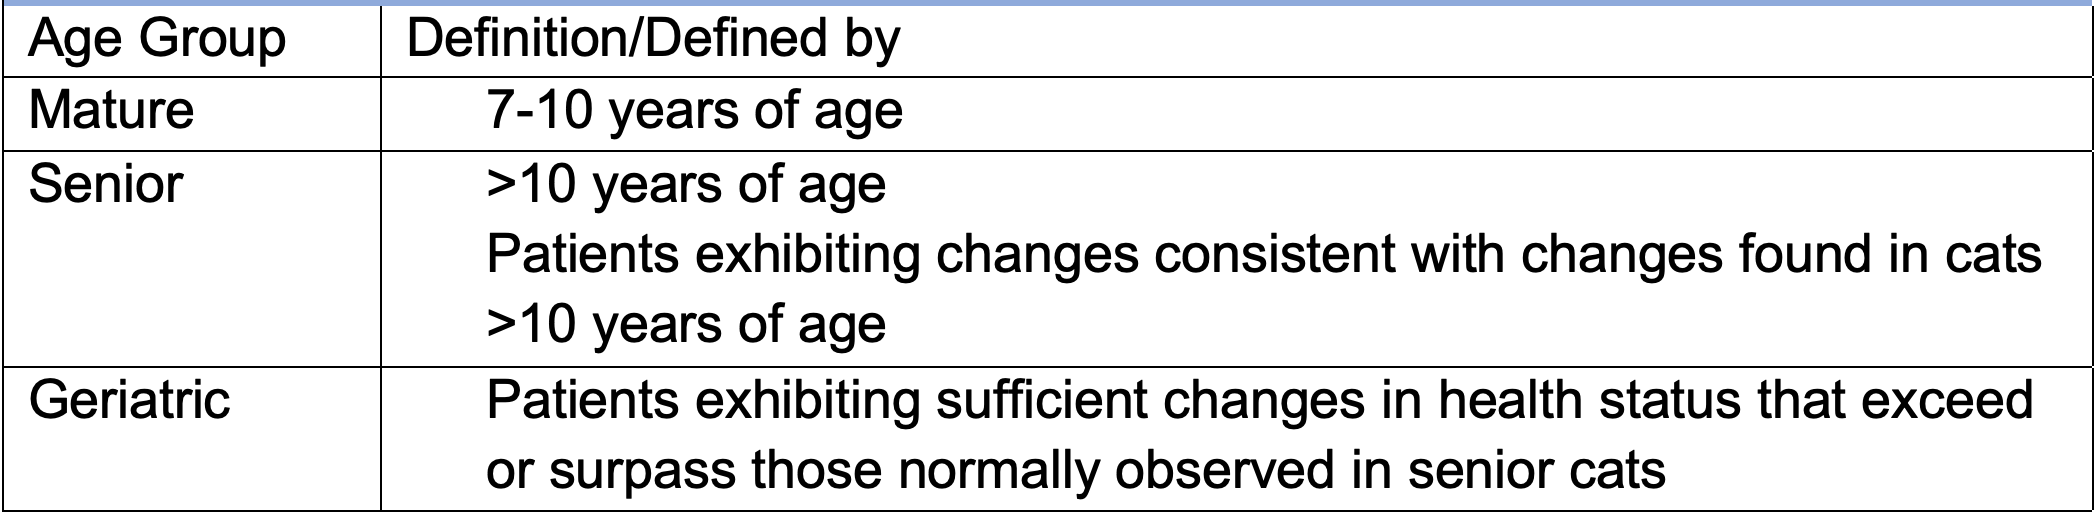 Table 1. Categorization of age groups in the aging domestic cat